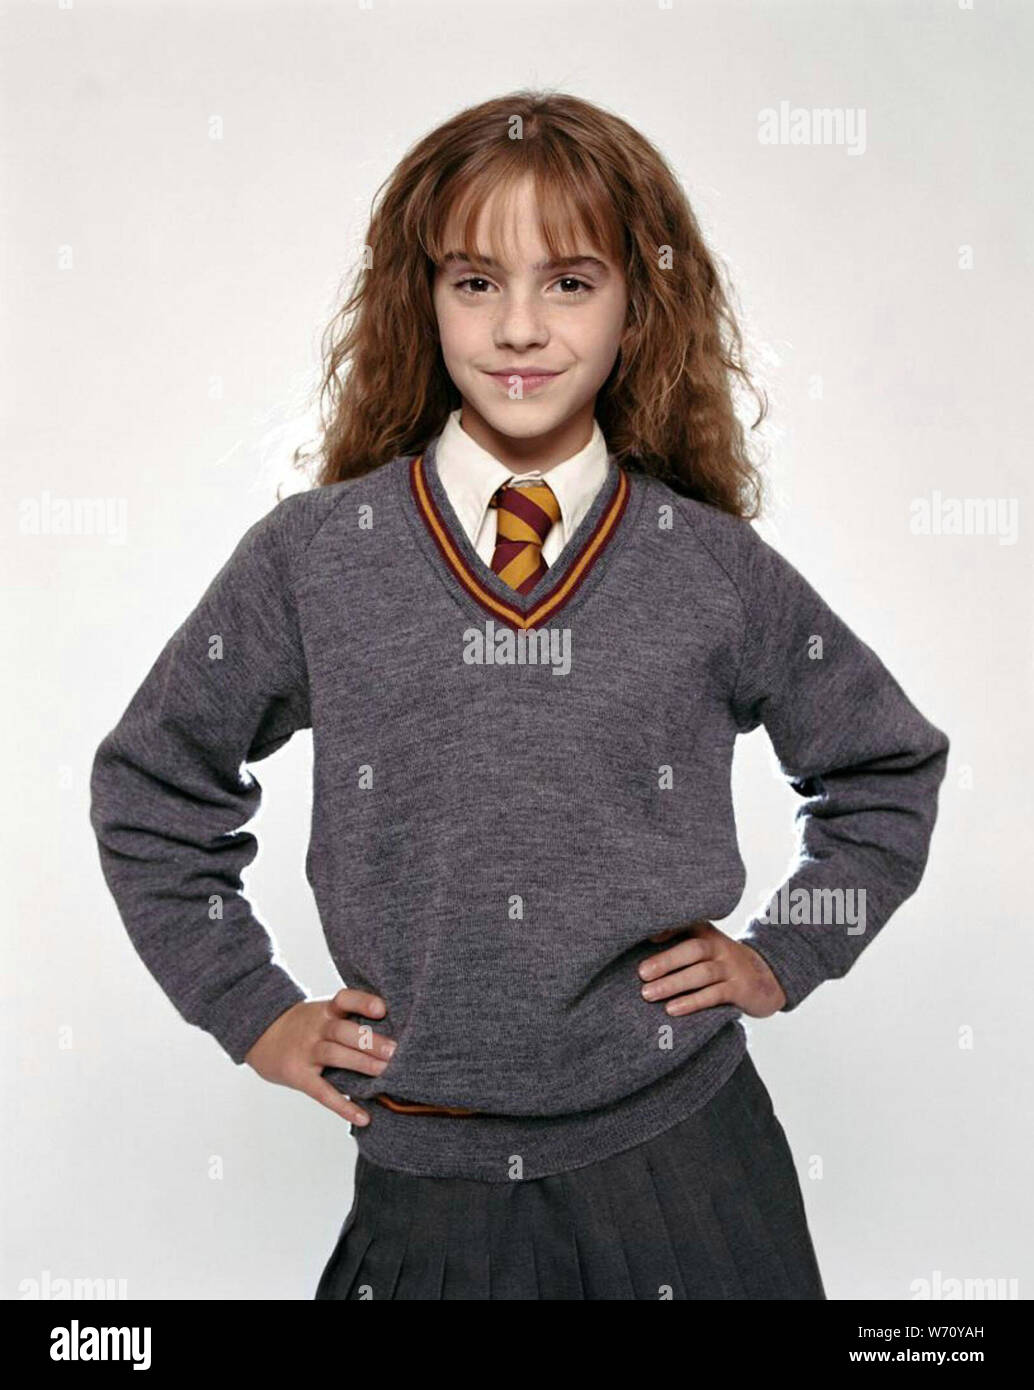 Emma watson harry potter 2001 hi-res stock photography and images - Alamy